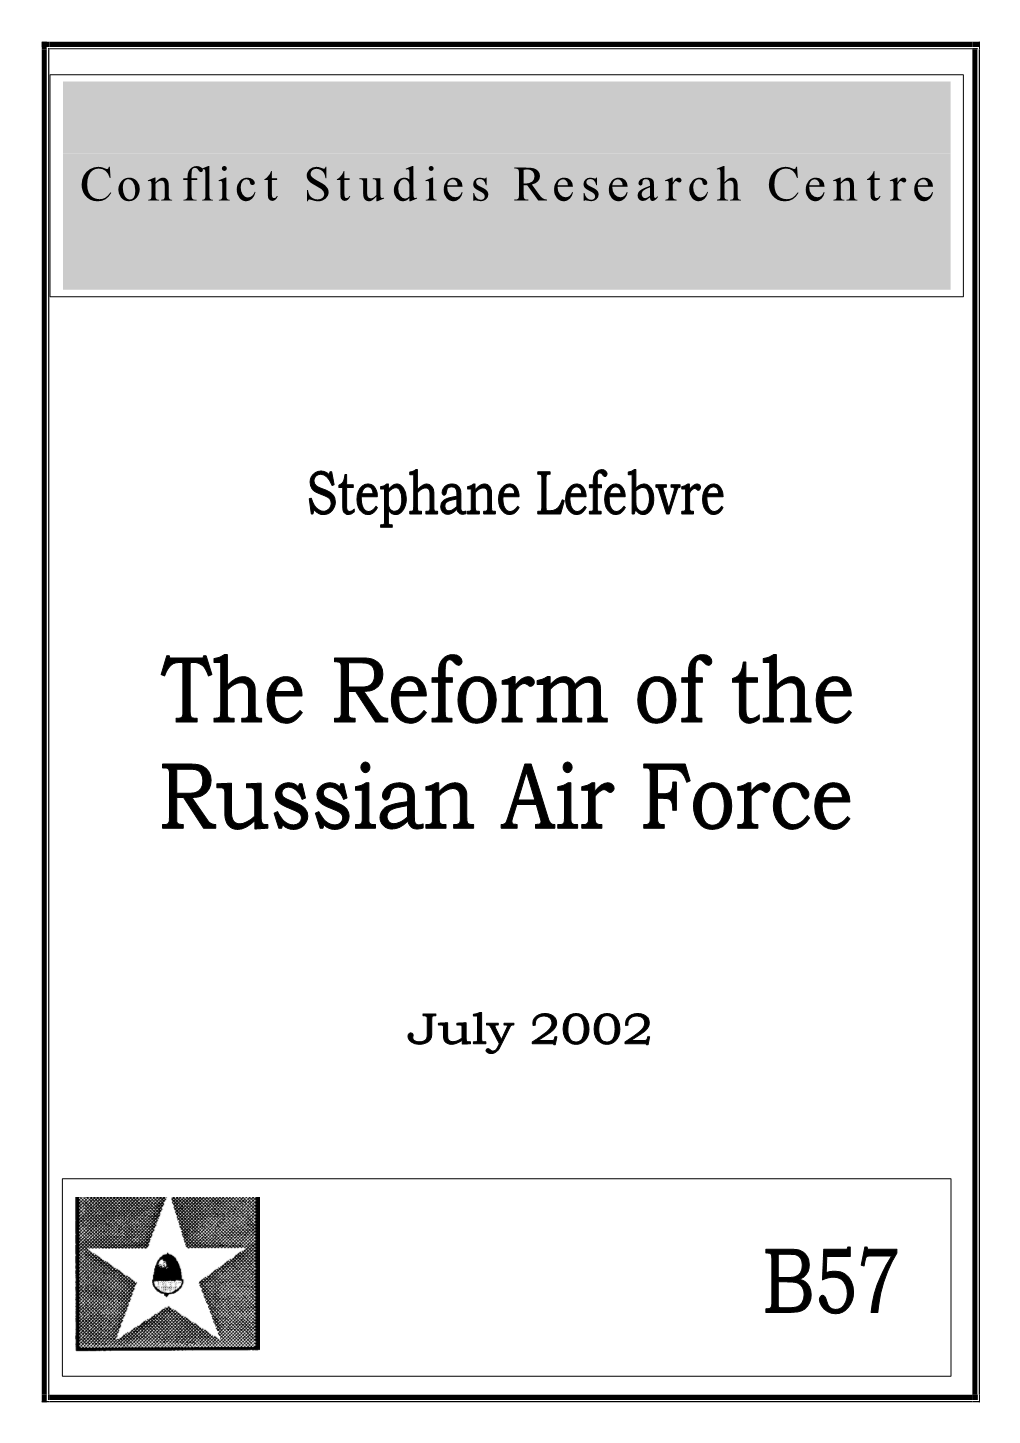 The Reform of the Russian Air Force